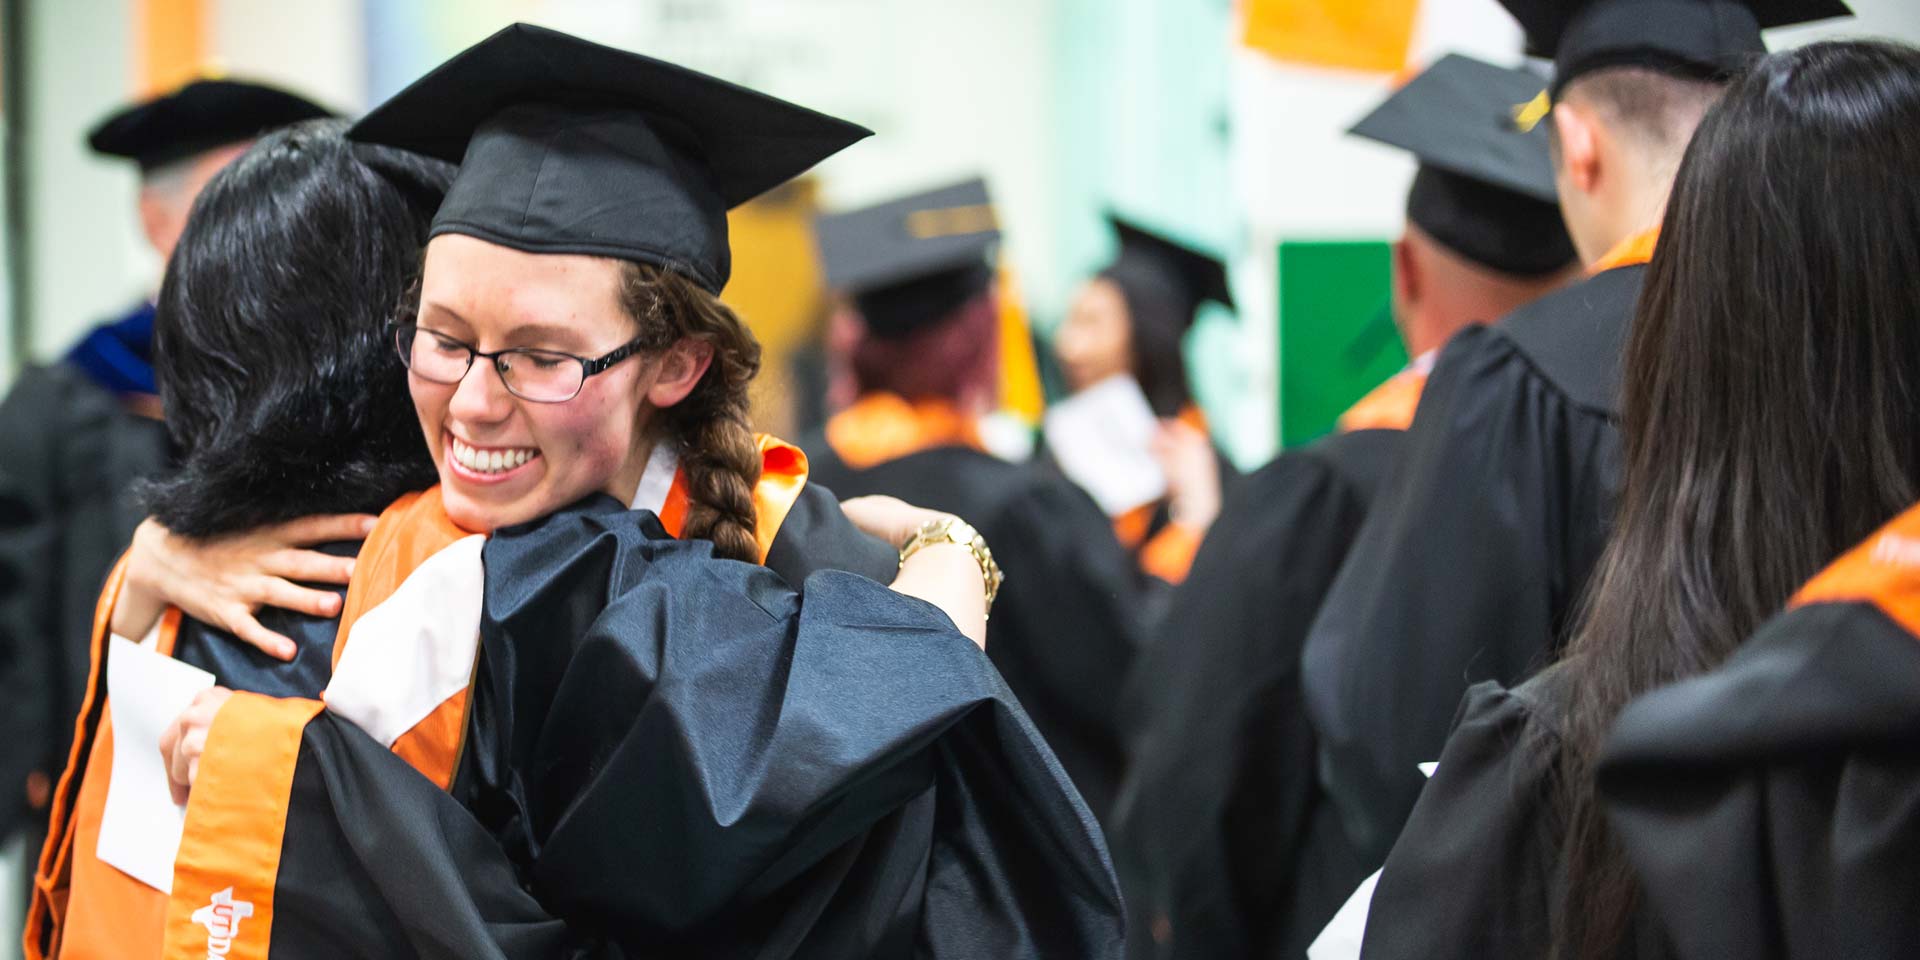 Jindal School bachelor's in business administration graduate hugging a friend on UT Dallas commencement day